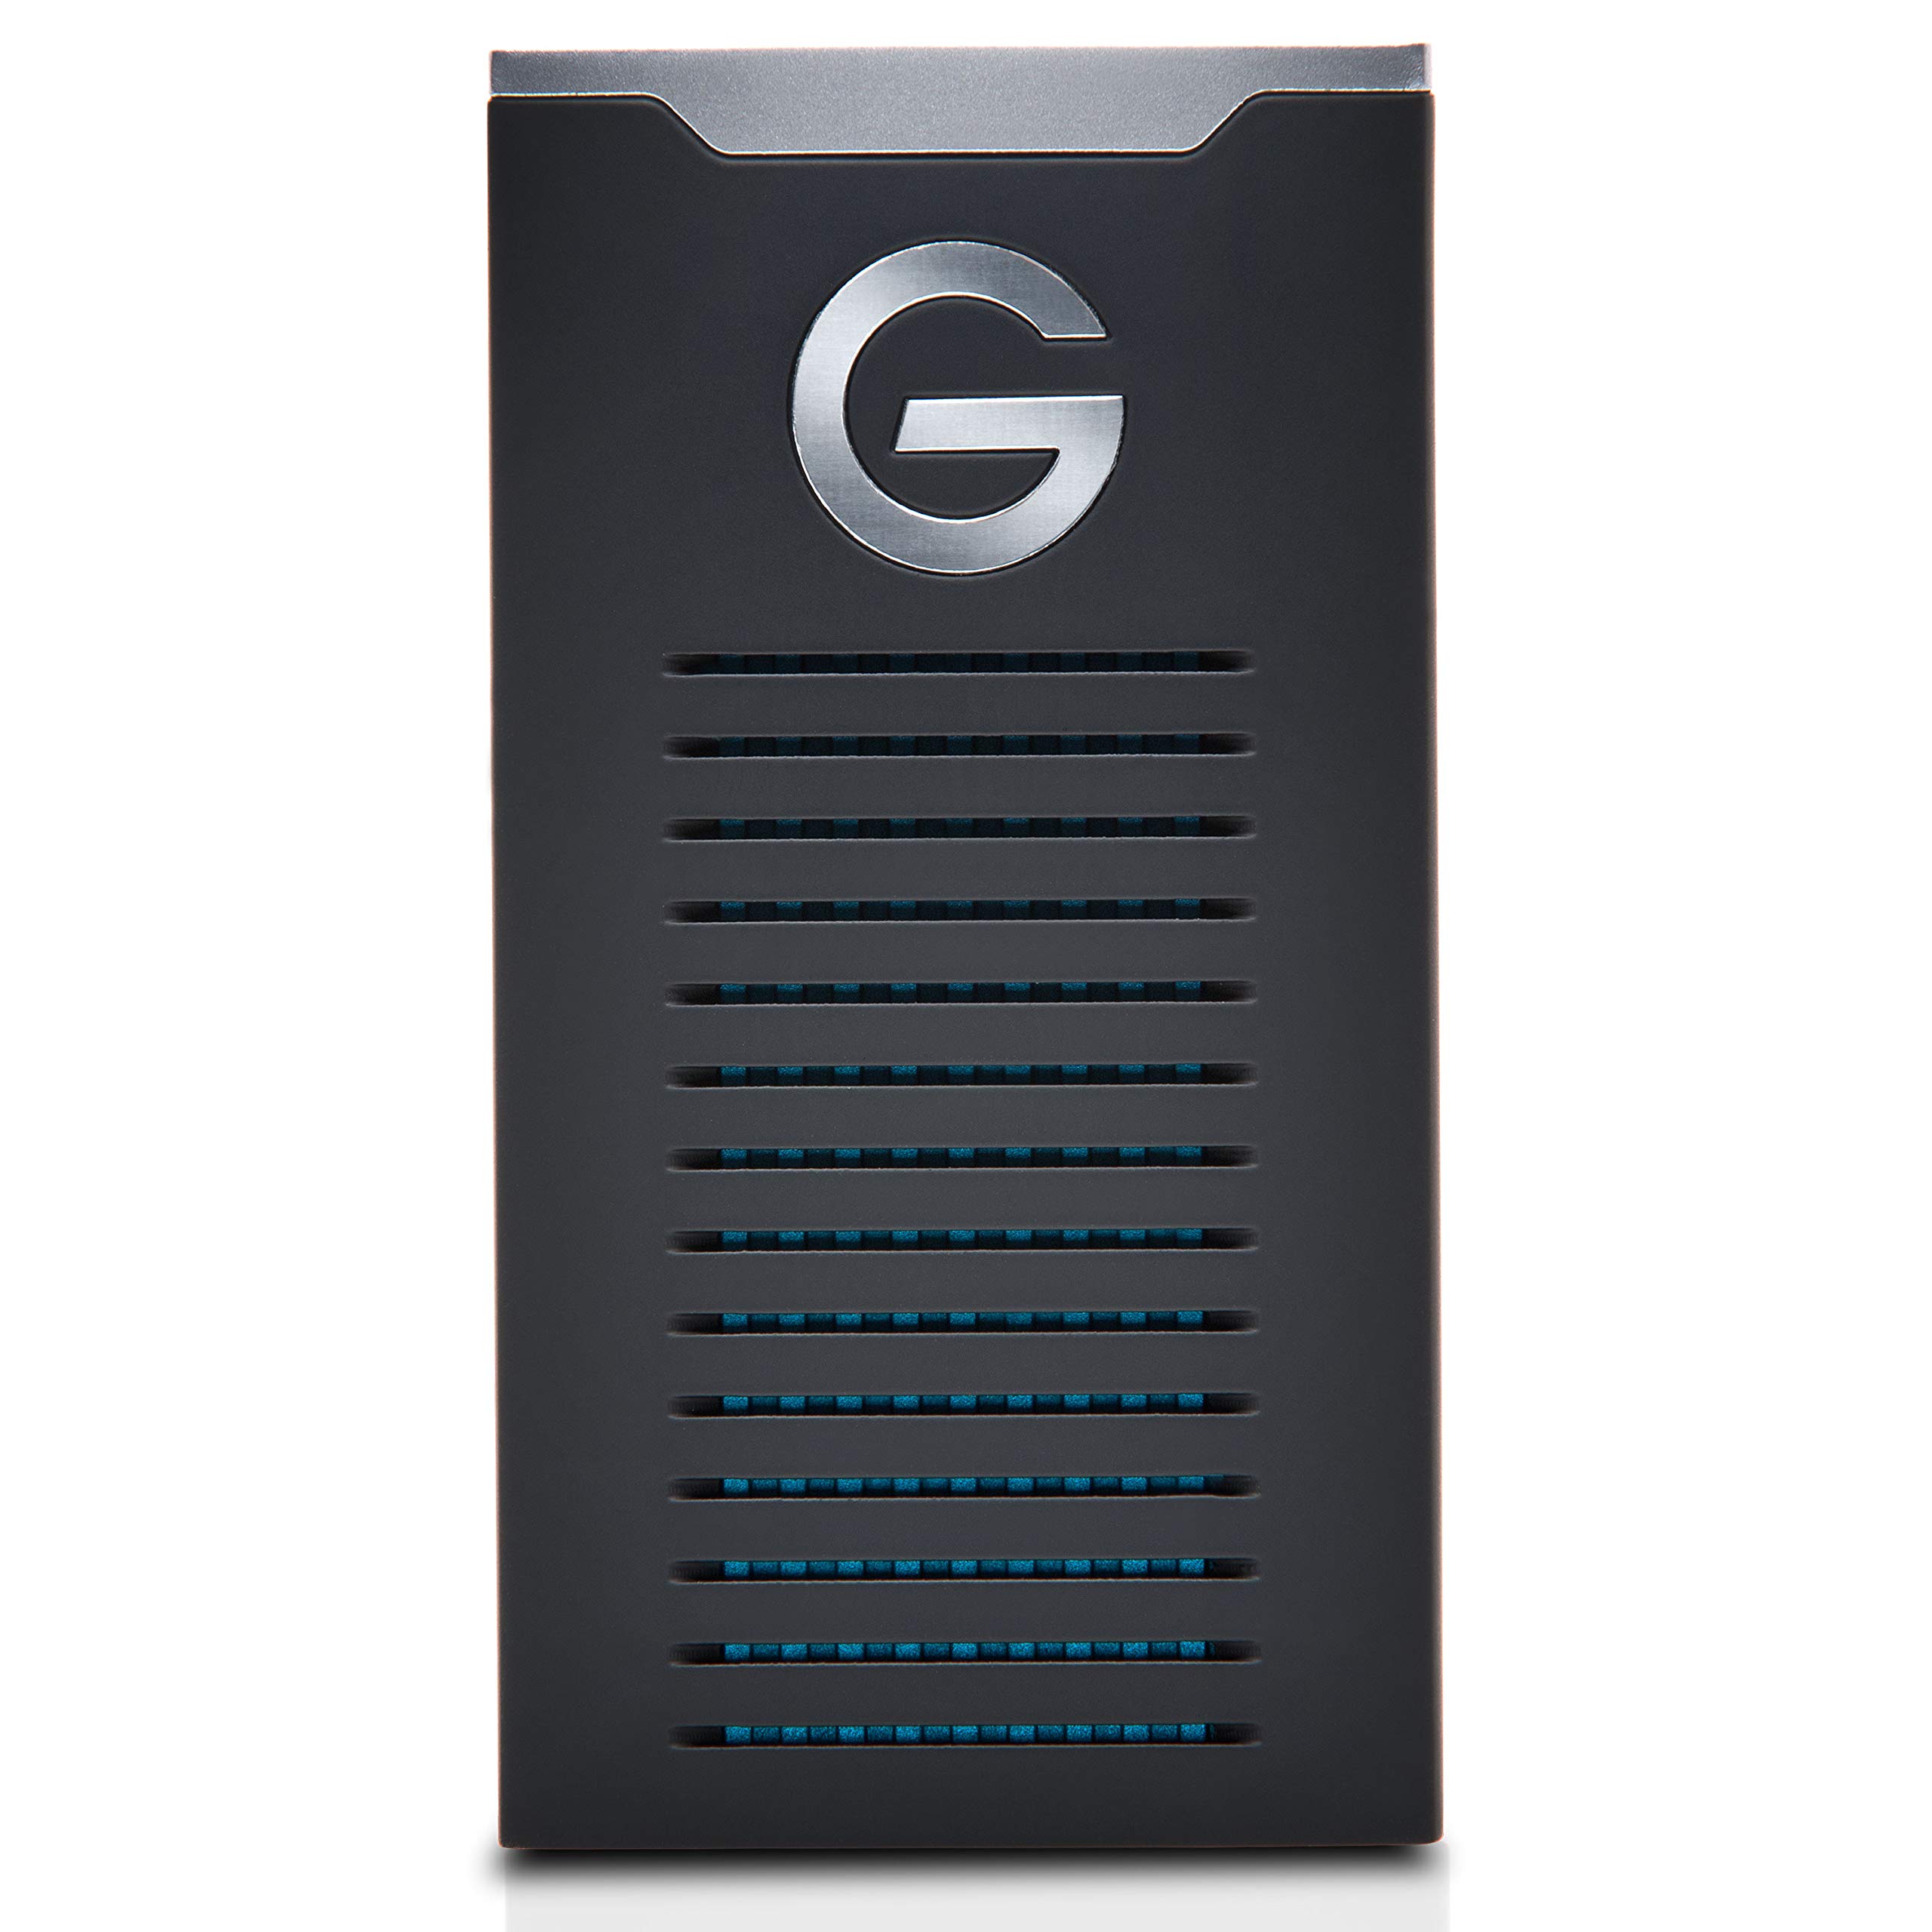 G-Technology Stockage externe portable durable SSD mobile G-DRIVE 2 To - USB-C (USB 3.1 Gen 2) - 0G06054